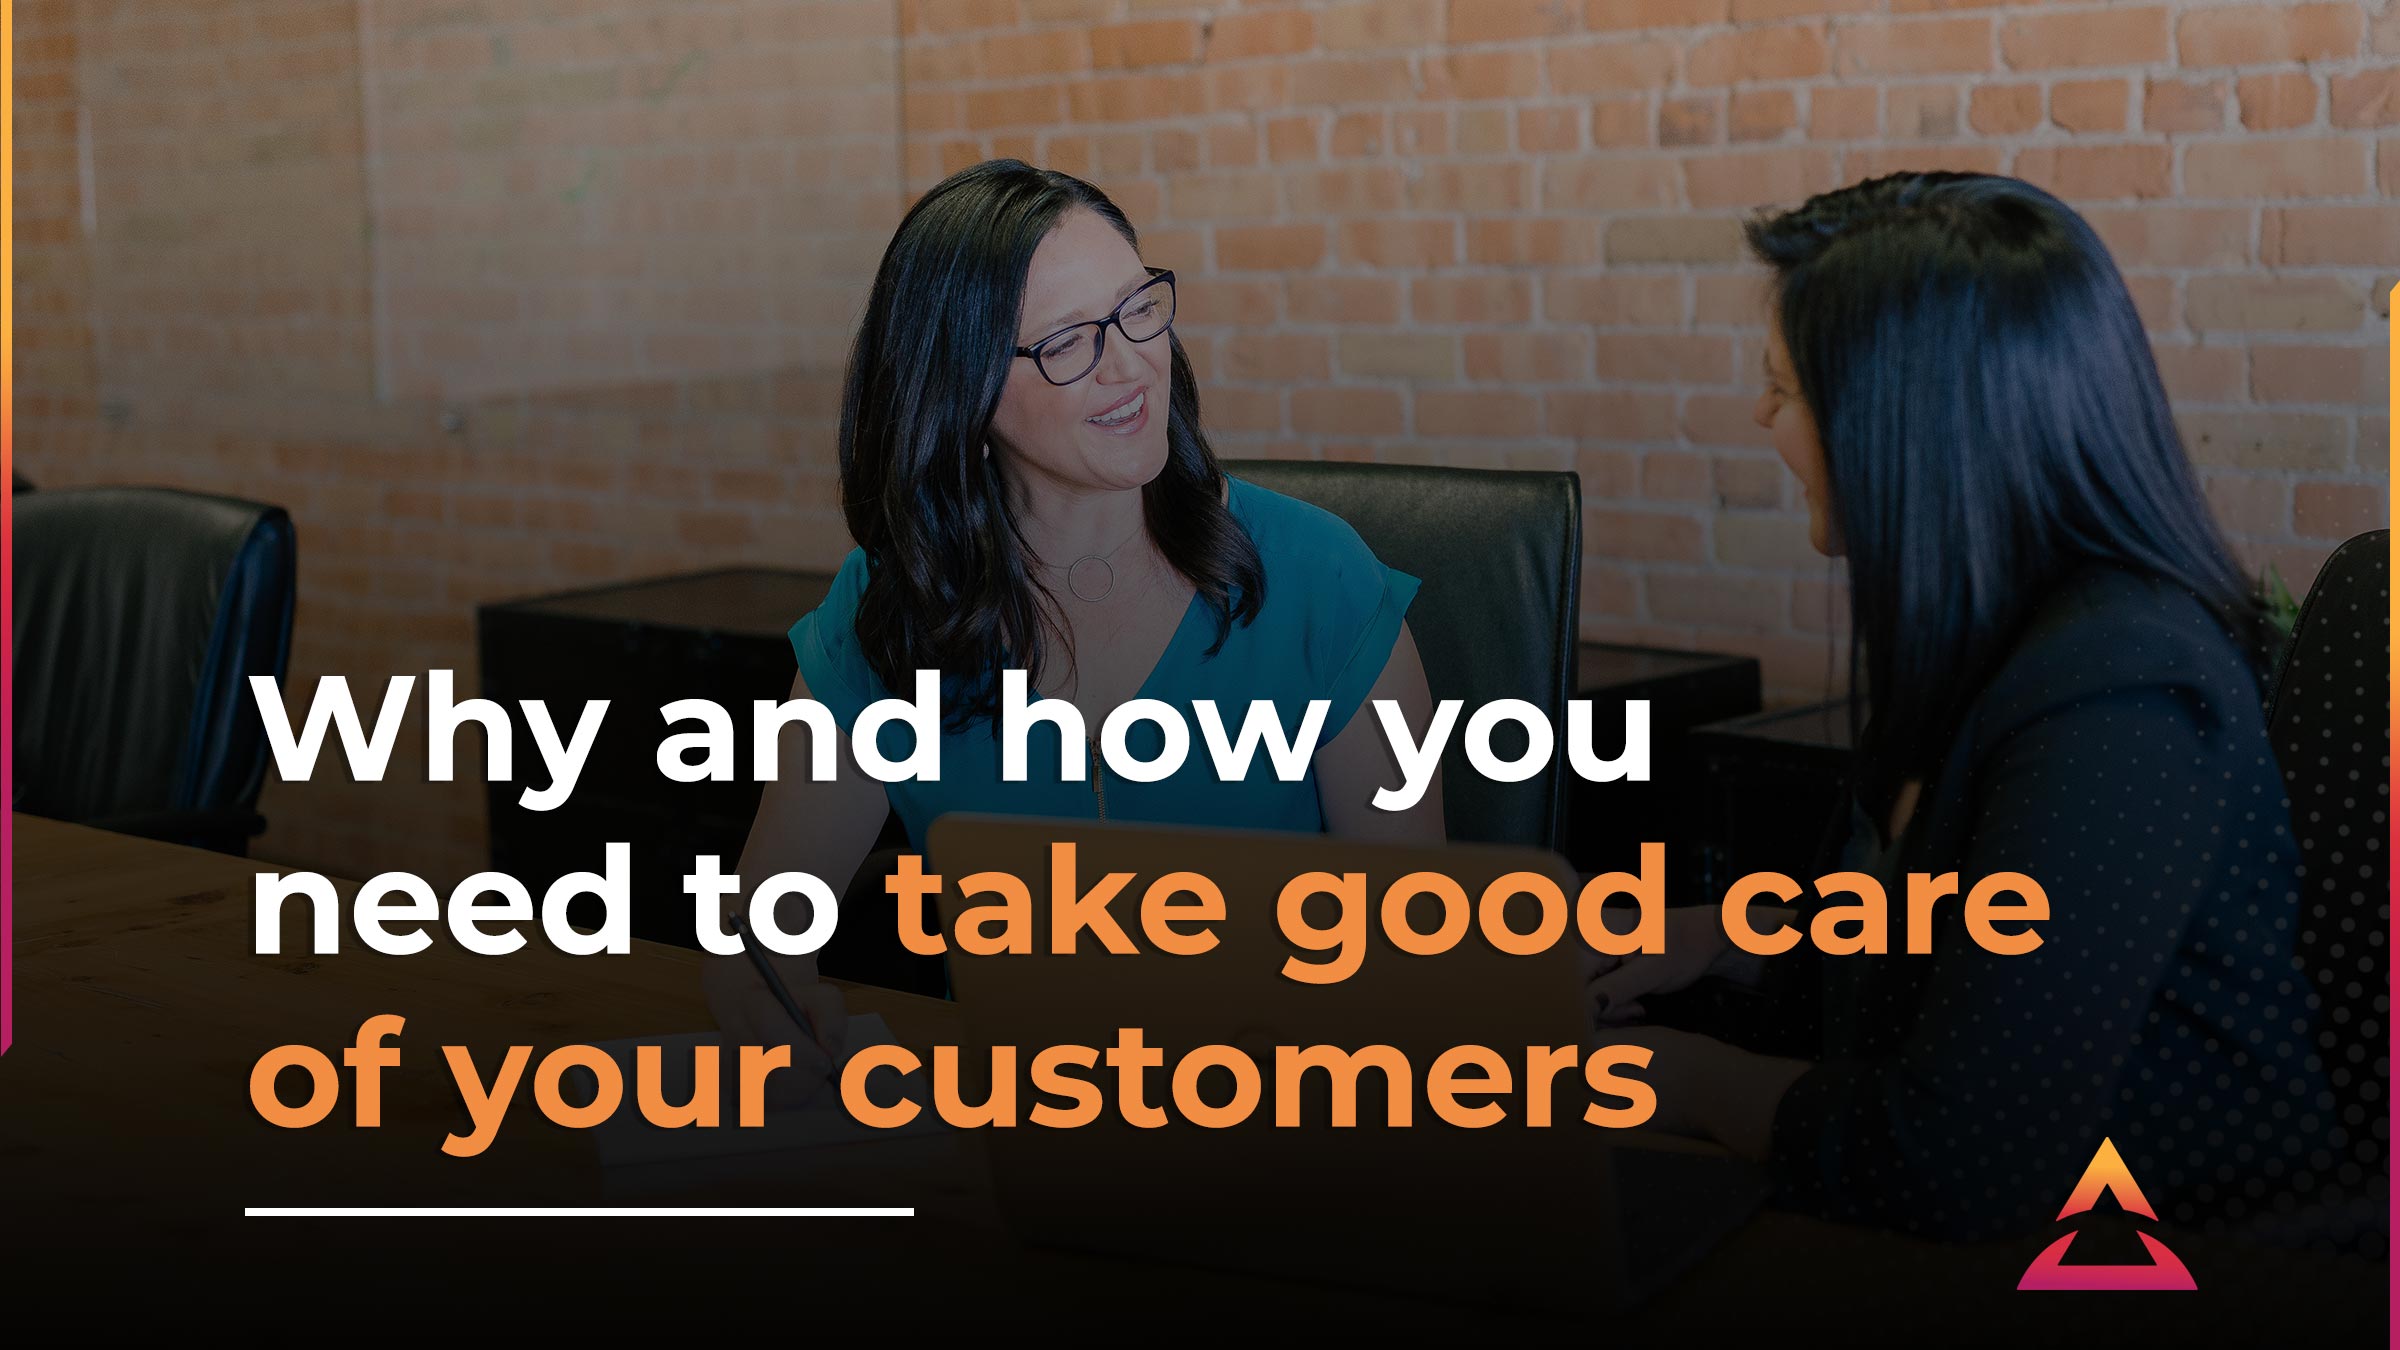 What Is Customer Experience & Why Should You Focus On It?